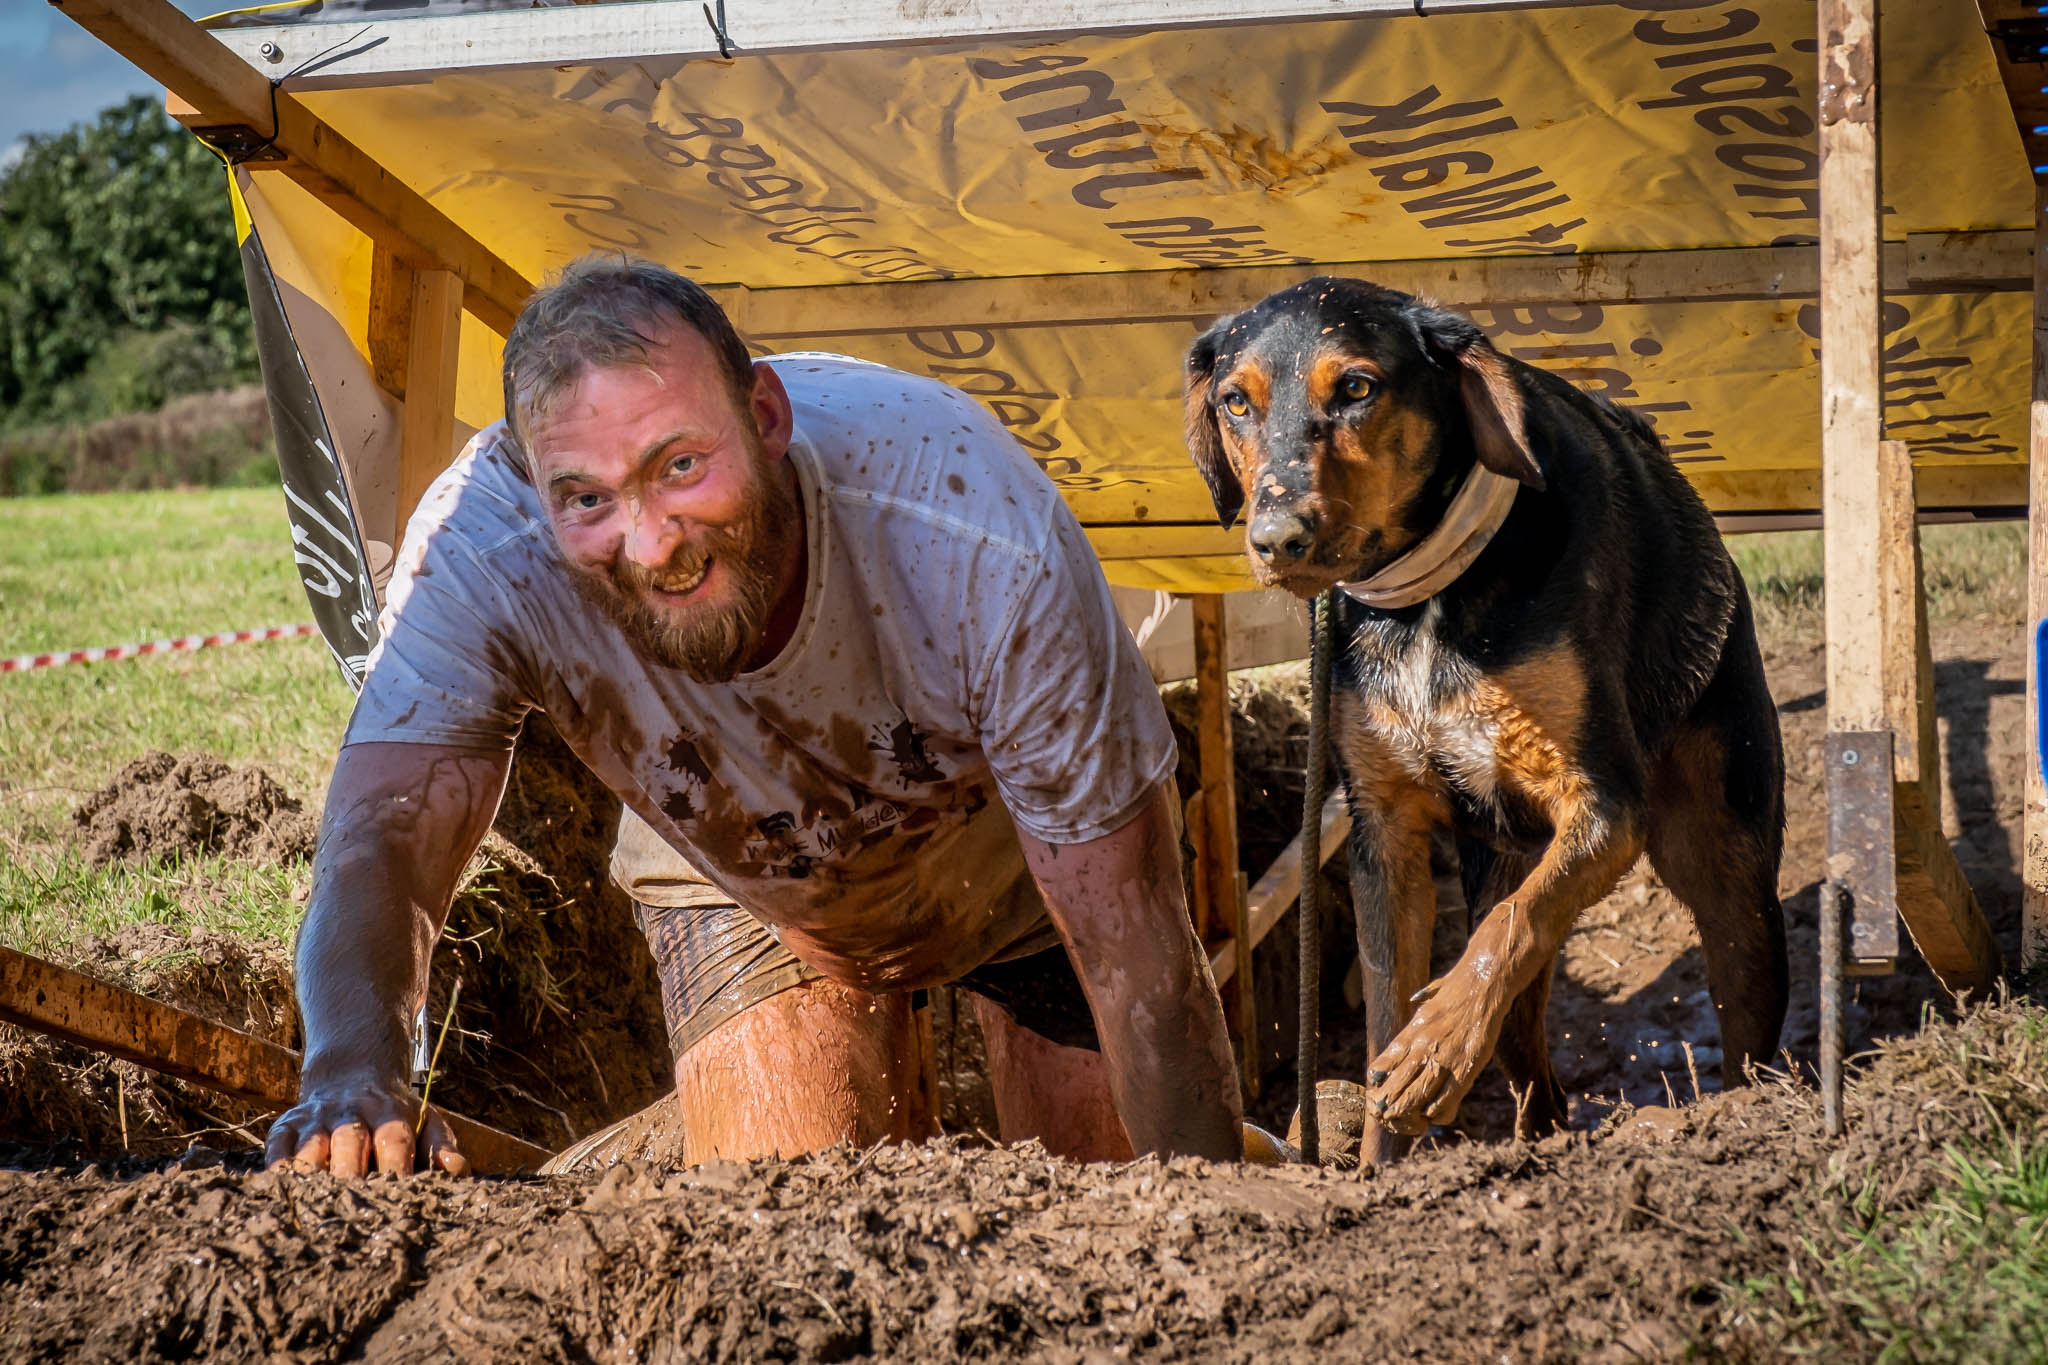 'Woof Mudder' invites St Luke's Hospice supporters and their dogs to take part in a Tough Mudder style 5km mud-run, full of obstacles, hills and water (St Luke's Cheshire Hospice).